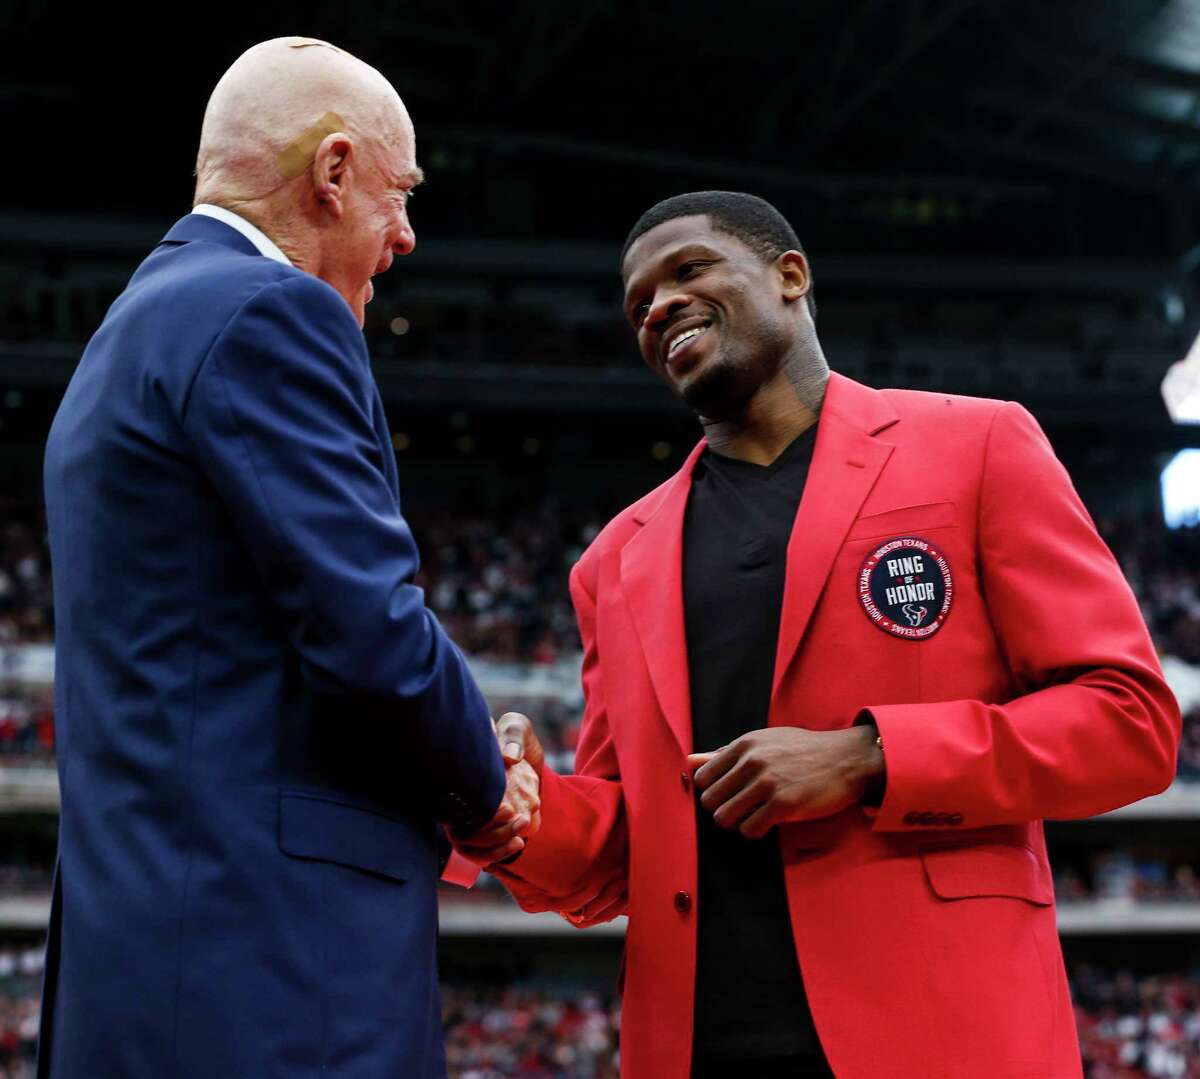 Houston Texans owner Bob McNair shankes hands with former Texans wide receiver Andre Johnson waves to the fans as he is honored as the first Texans player in the Ring of Honor during the halftime celebration at NRG Stadium on Sunday, Nov. 19, 2017, in Houston.